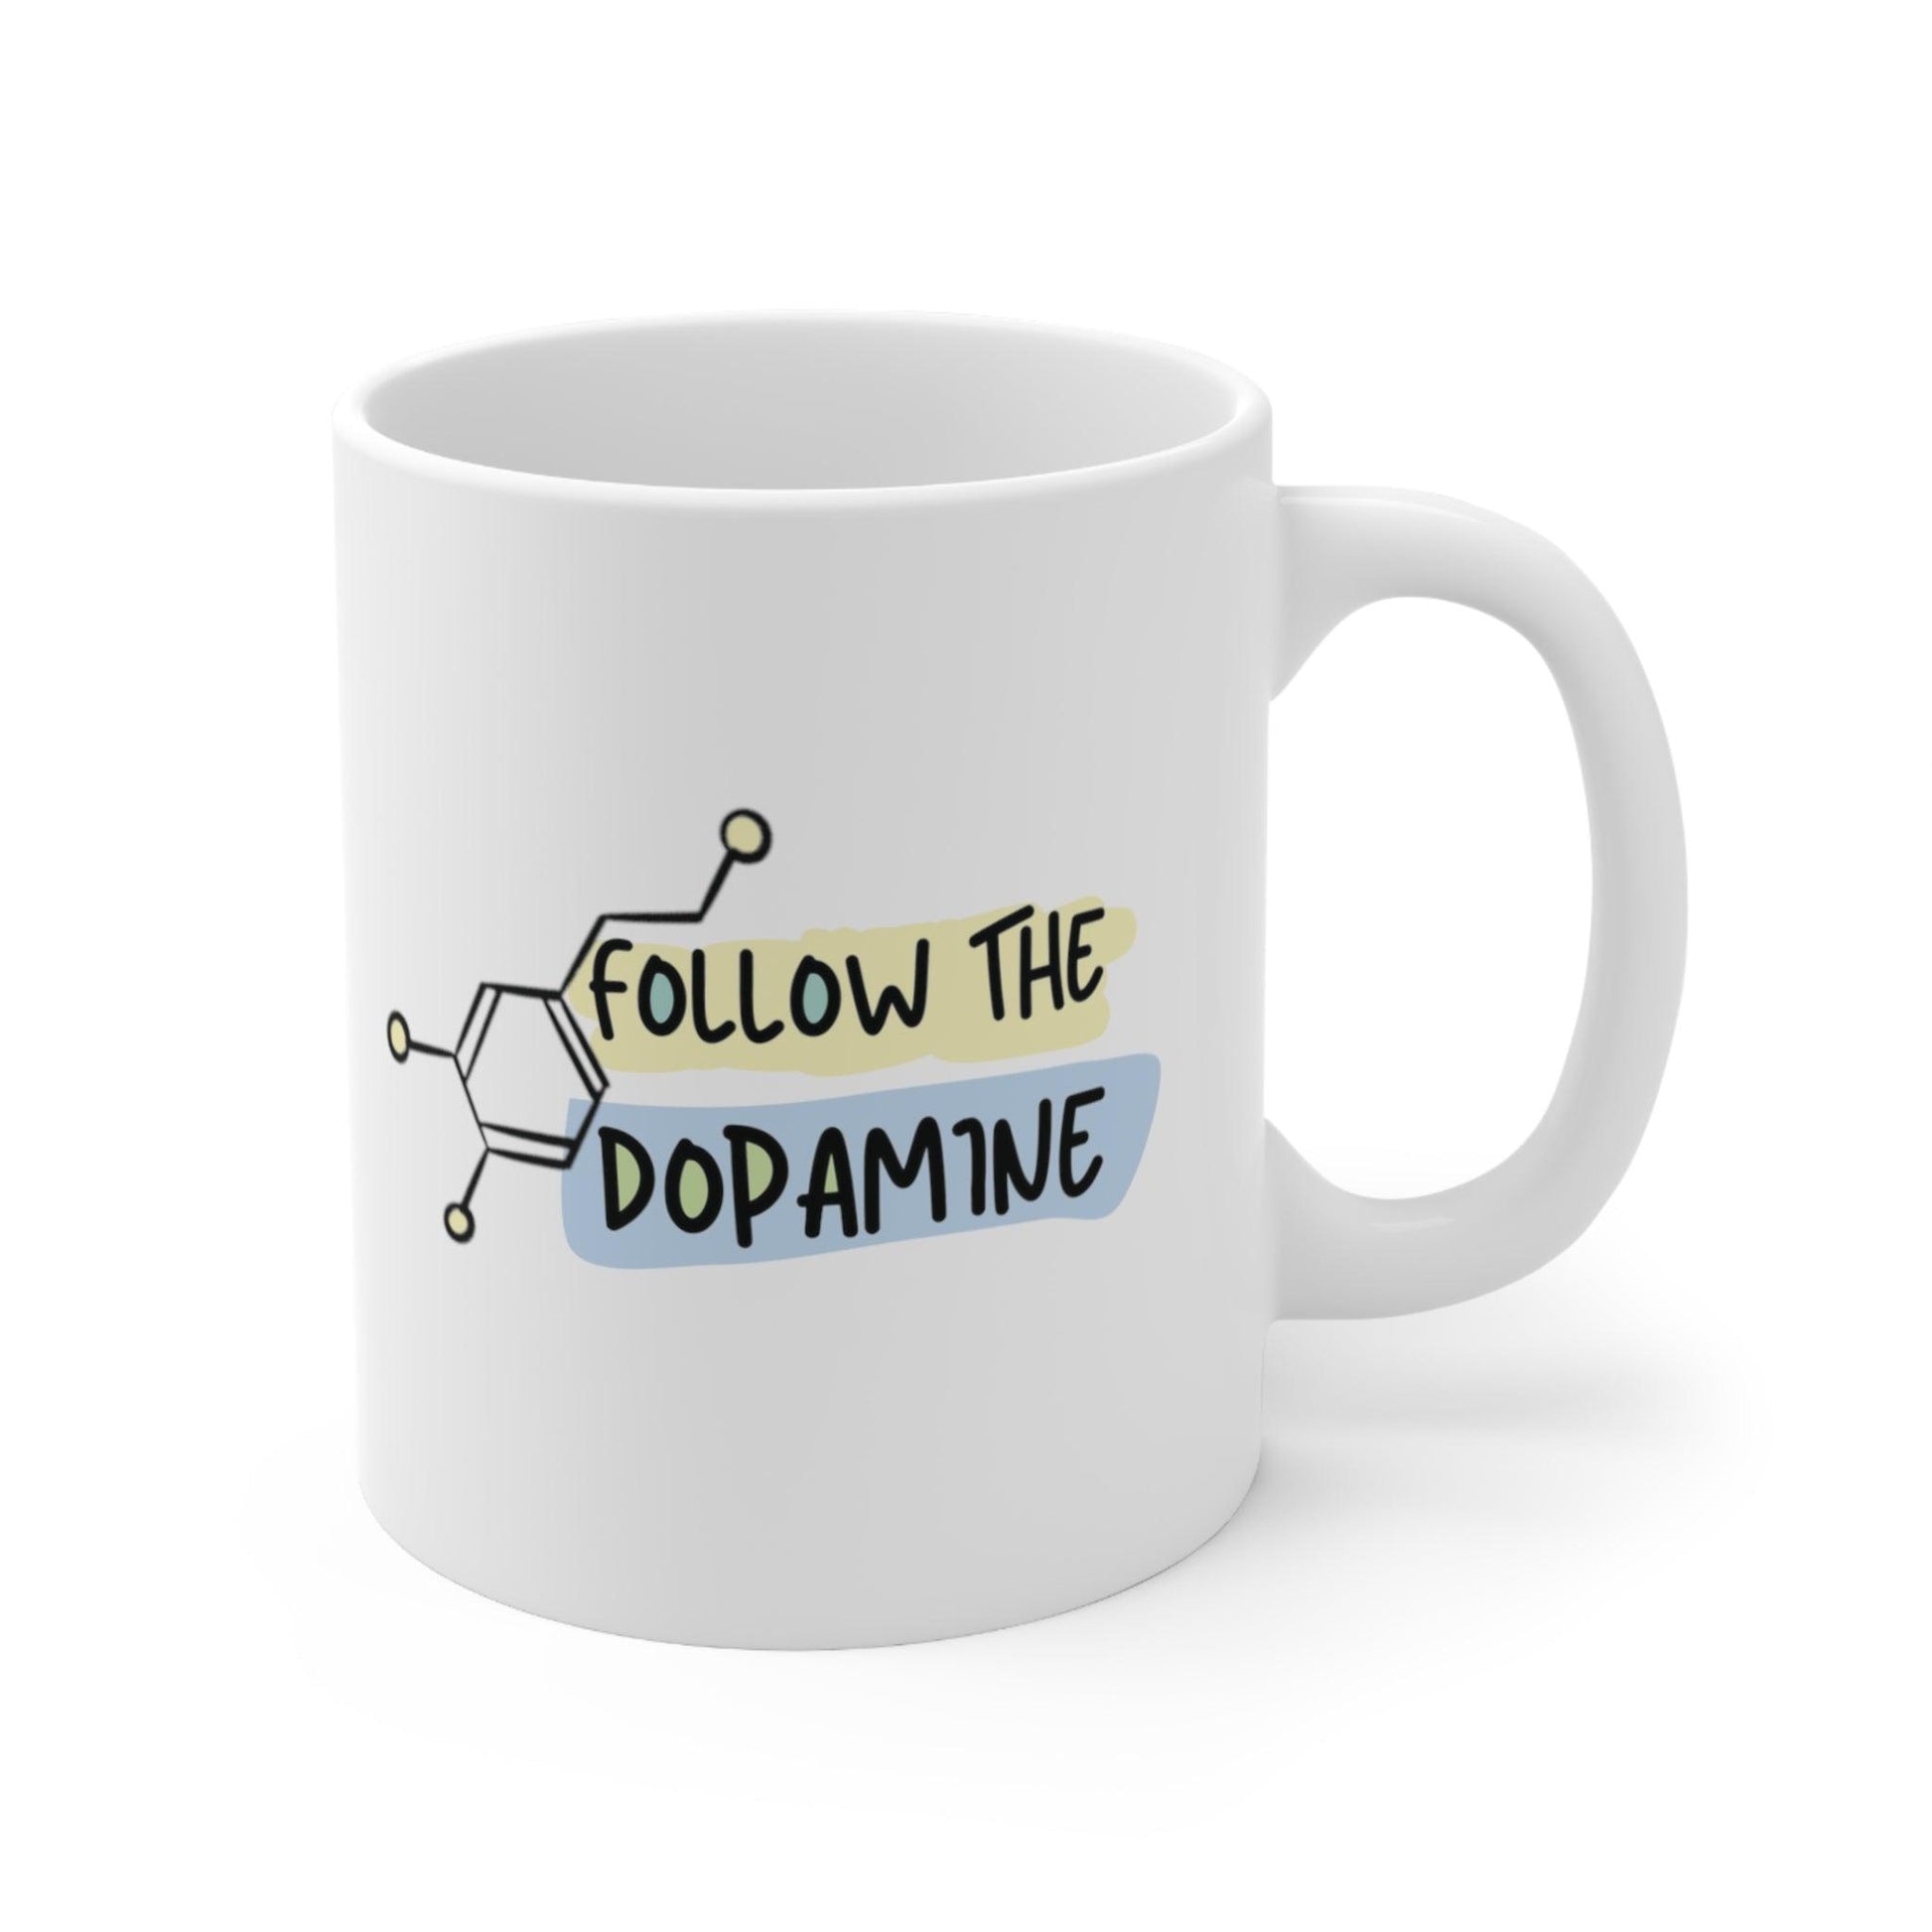 Follow the Dopamine Mug - Navigate Your Neurochemical Pathways - Inspirational ADHD Coffee Cup - Fidget and Focus